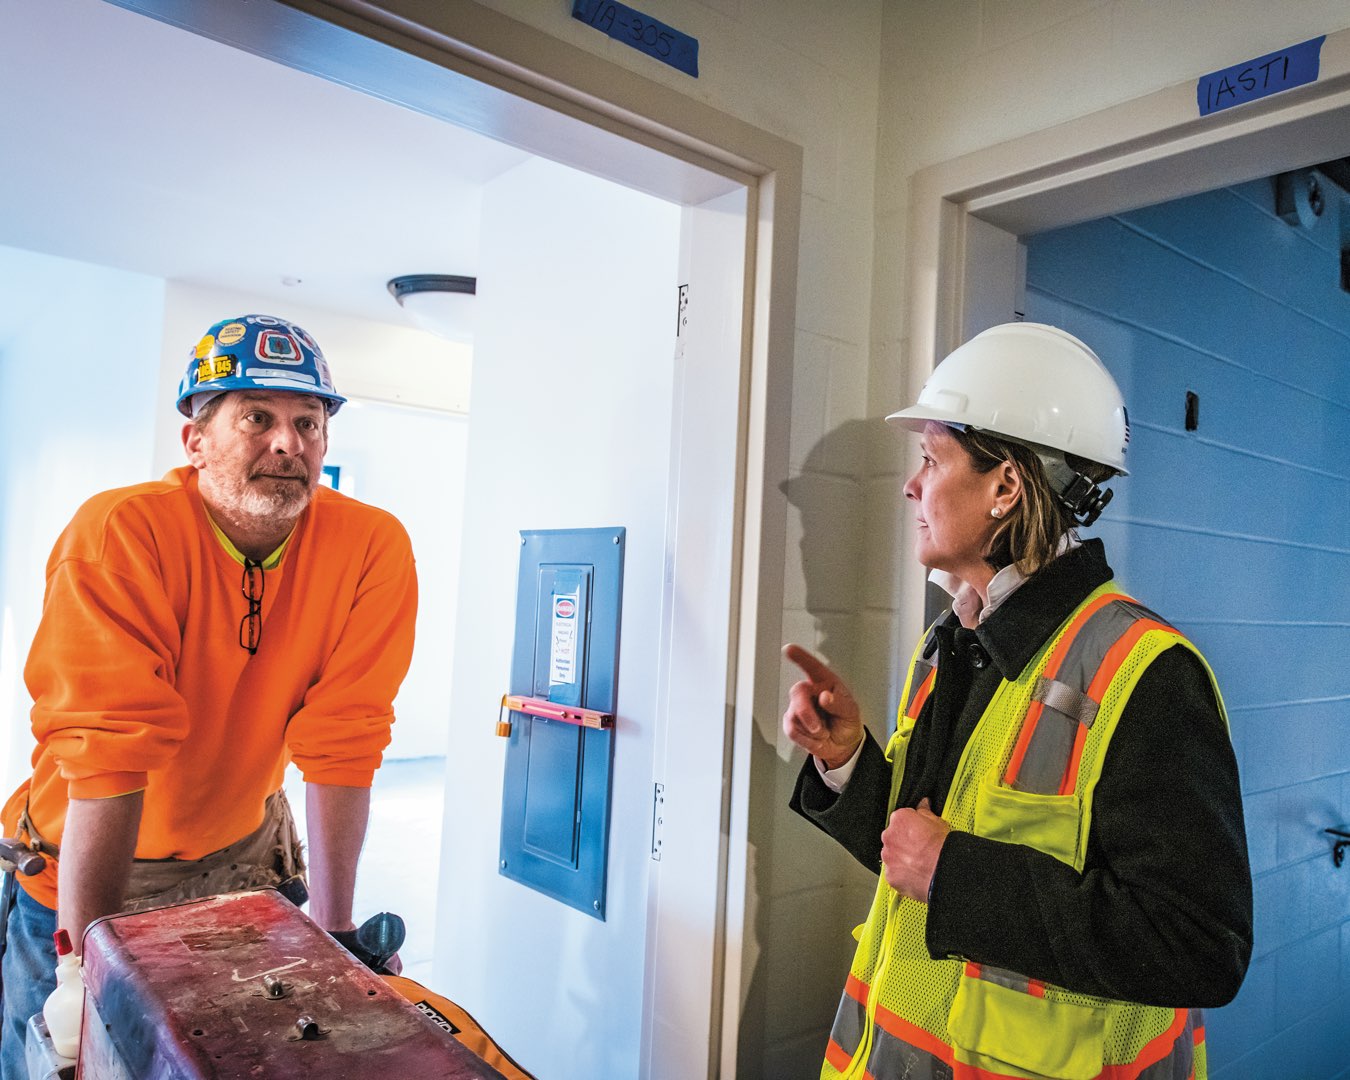 Marilou Smith talks with a contractor working on the interior finishing of The Commons residence halls